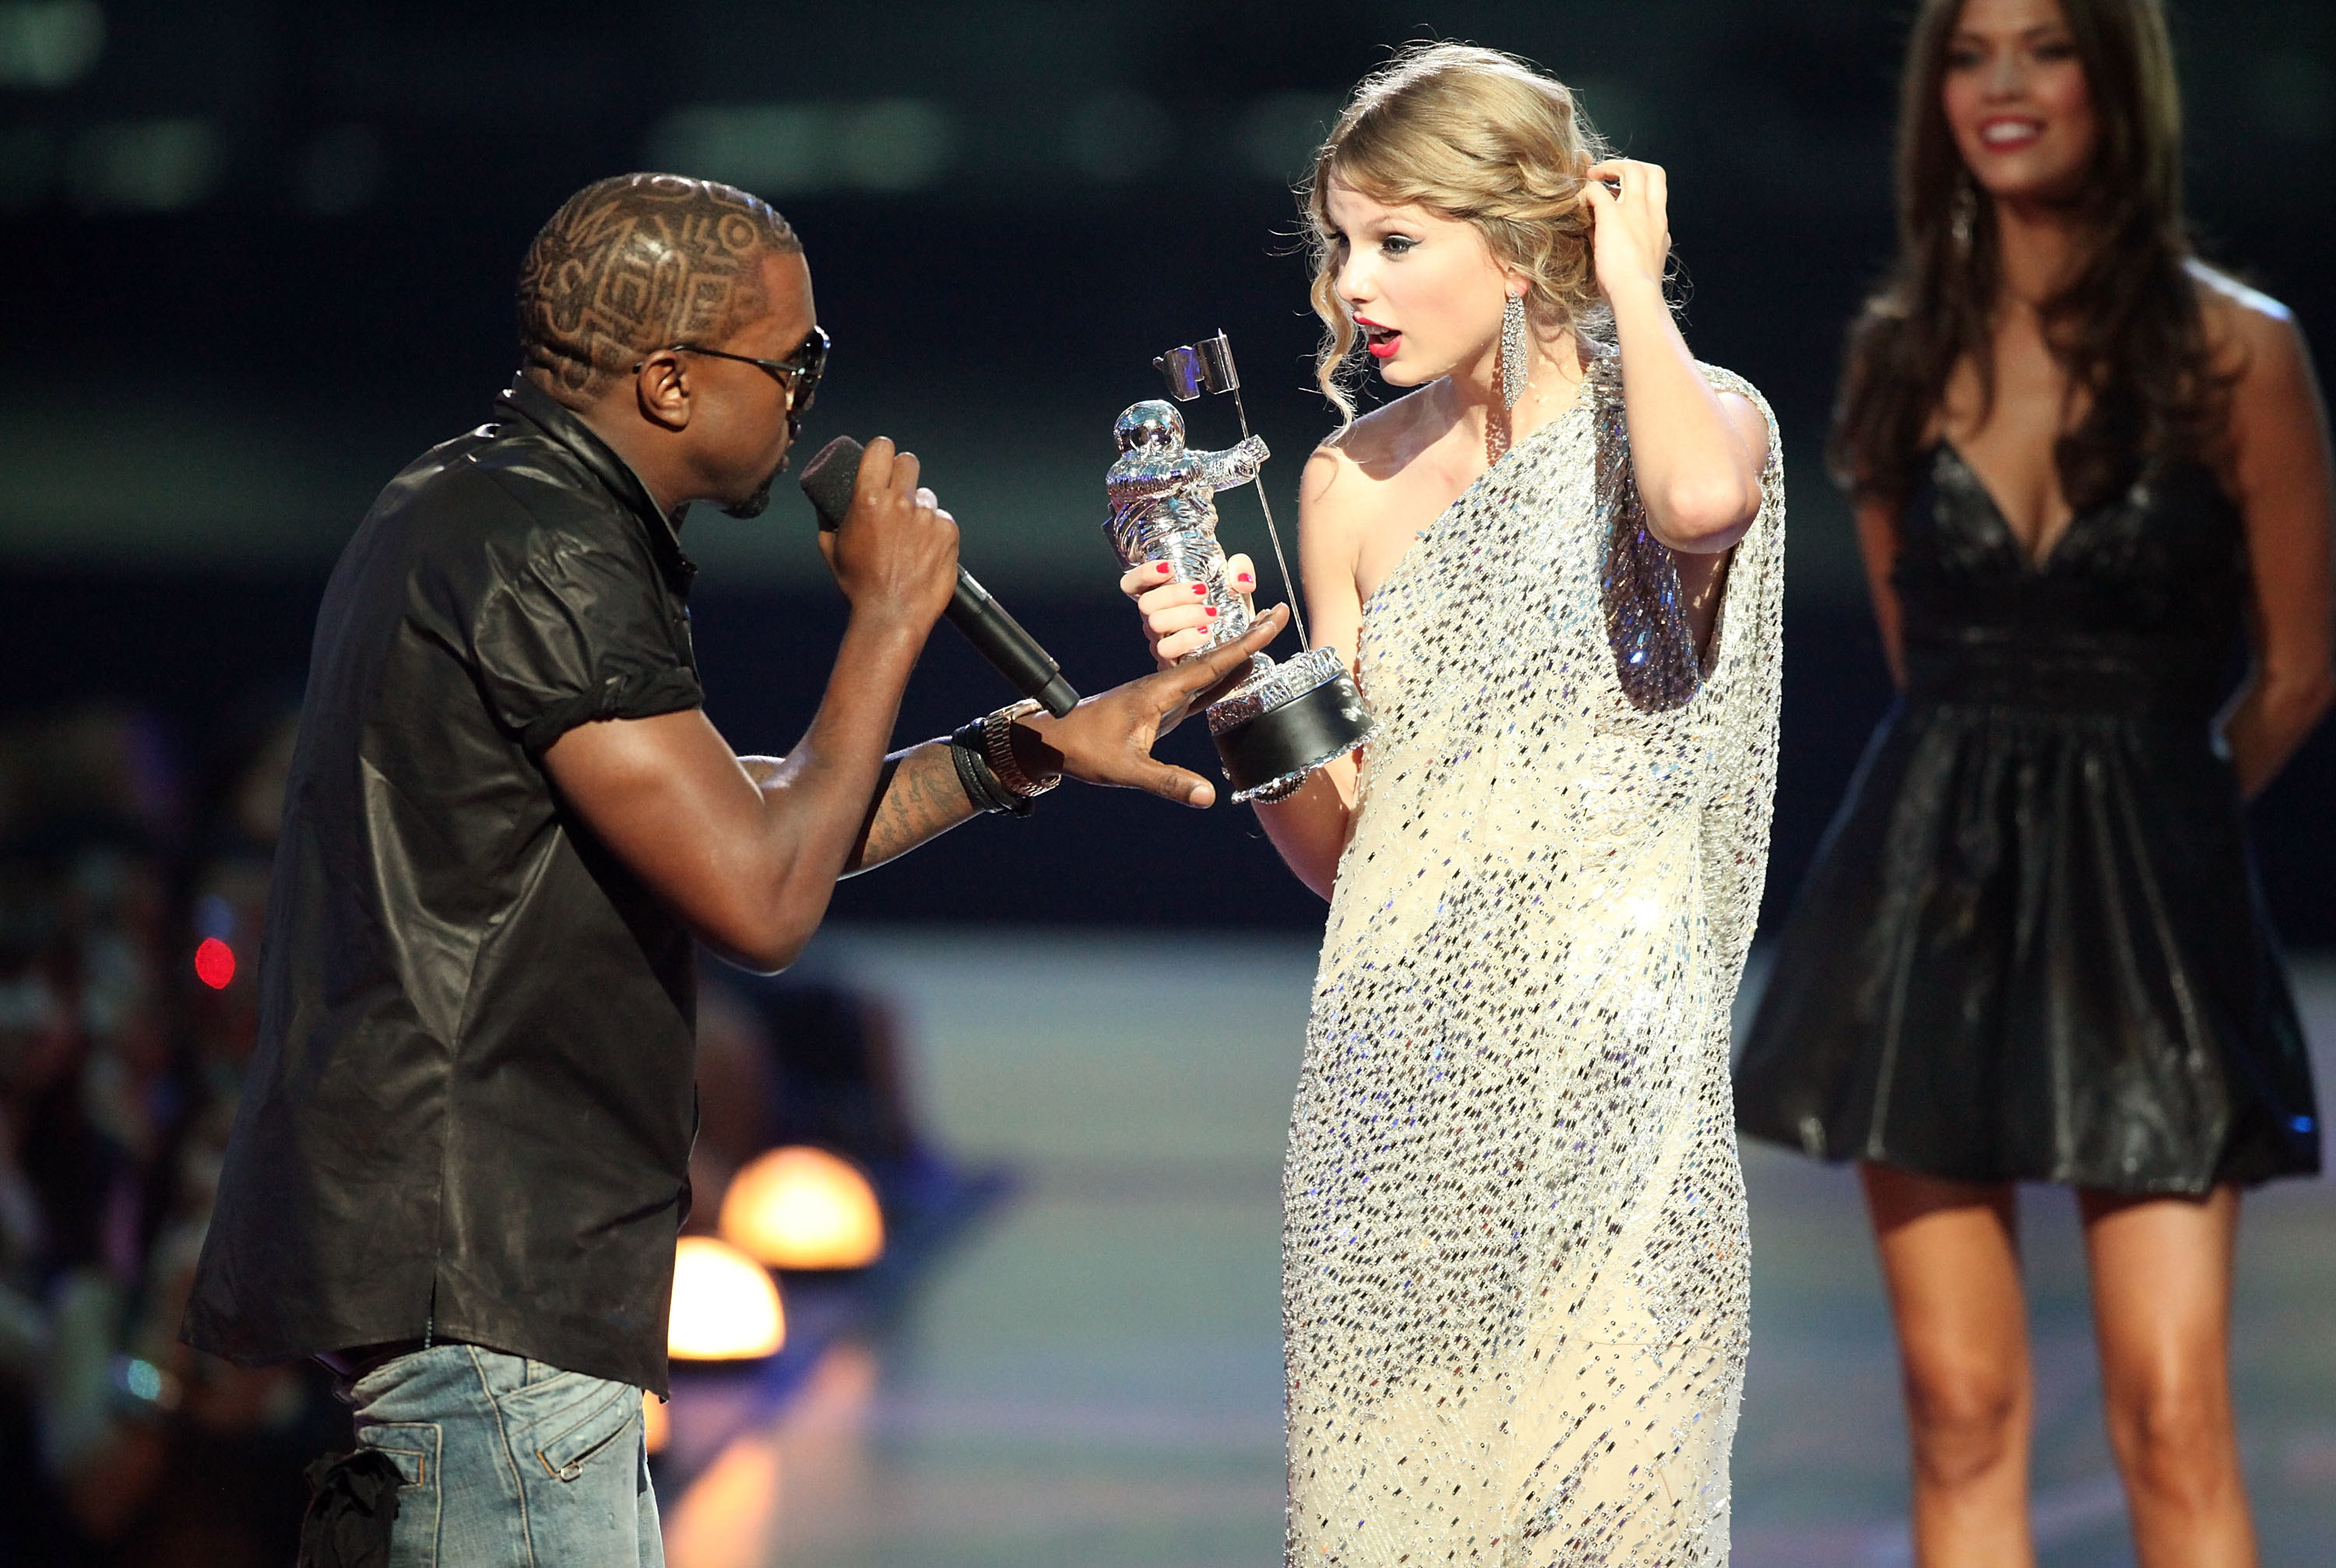 Kanye West jumps onstage after Taylor Swift won the &quot;Best Female Video&quot; award during the 2009 MTV Video Music Awards at Radio City Music Hall on September 13, 2009